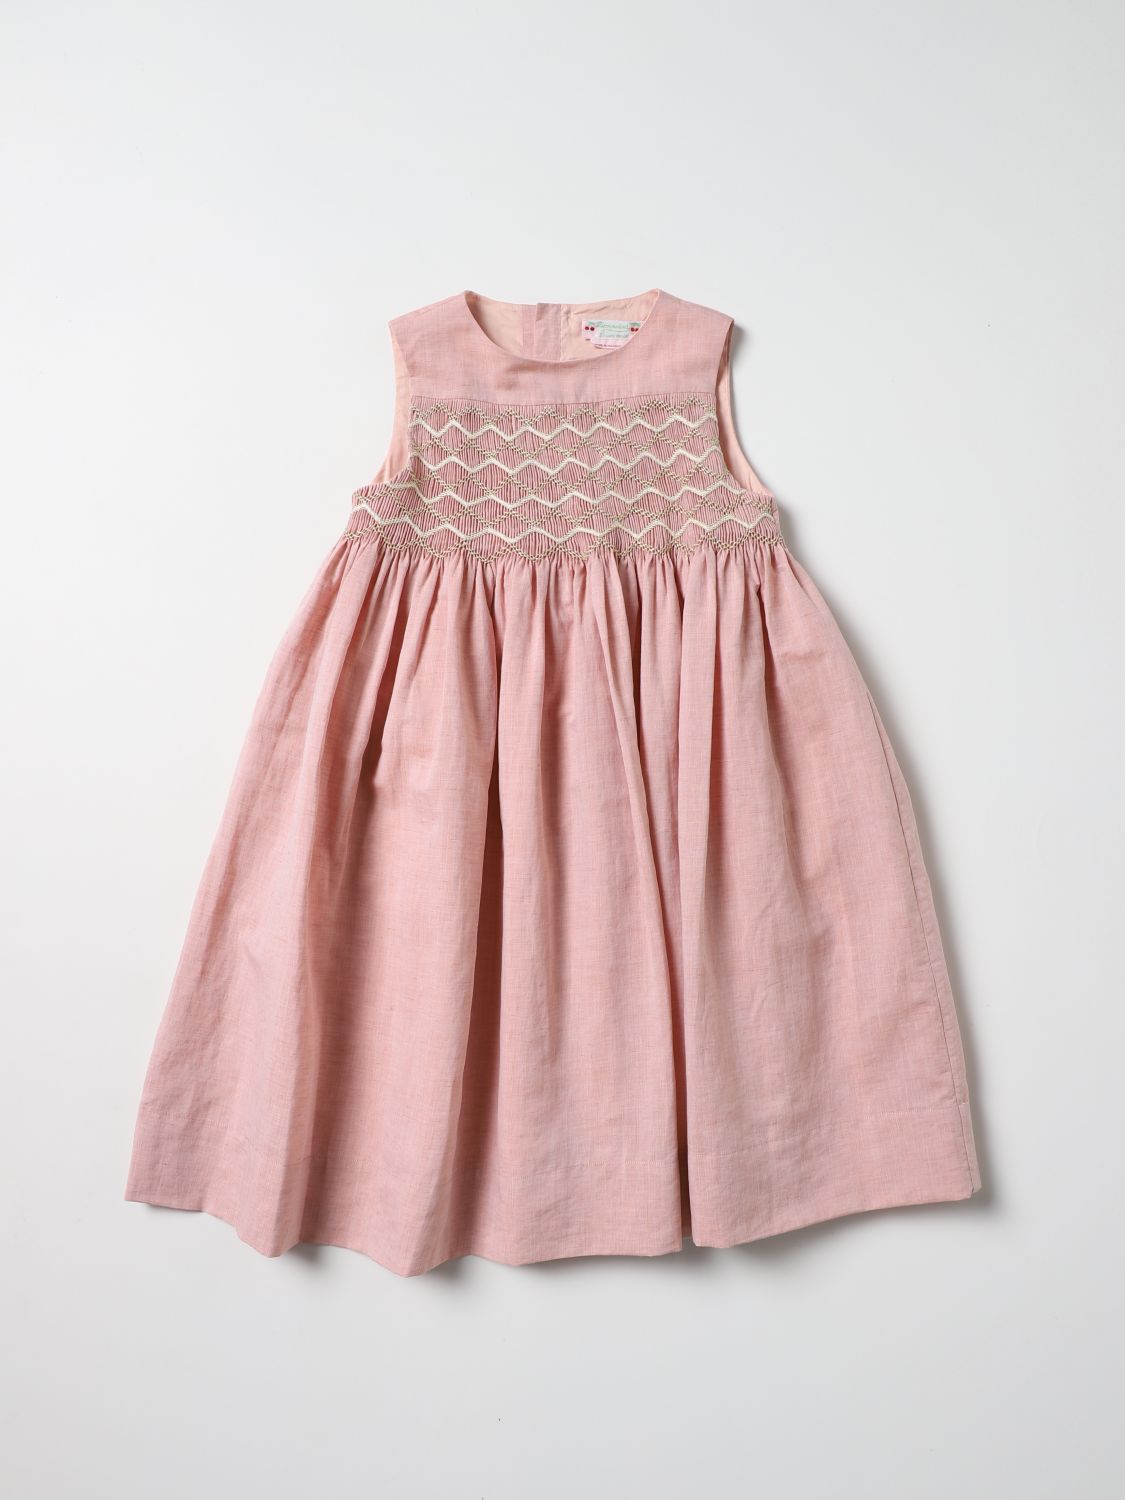 Kids Baby Bonpoint Clothing Bonpoint Kids Dresses Bonpoint Kids Dresses Bonpoint Kids Dress BONPOINT 12 months pink 